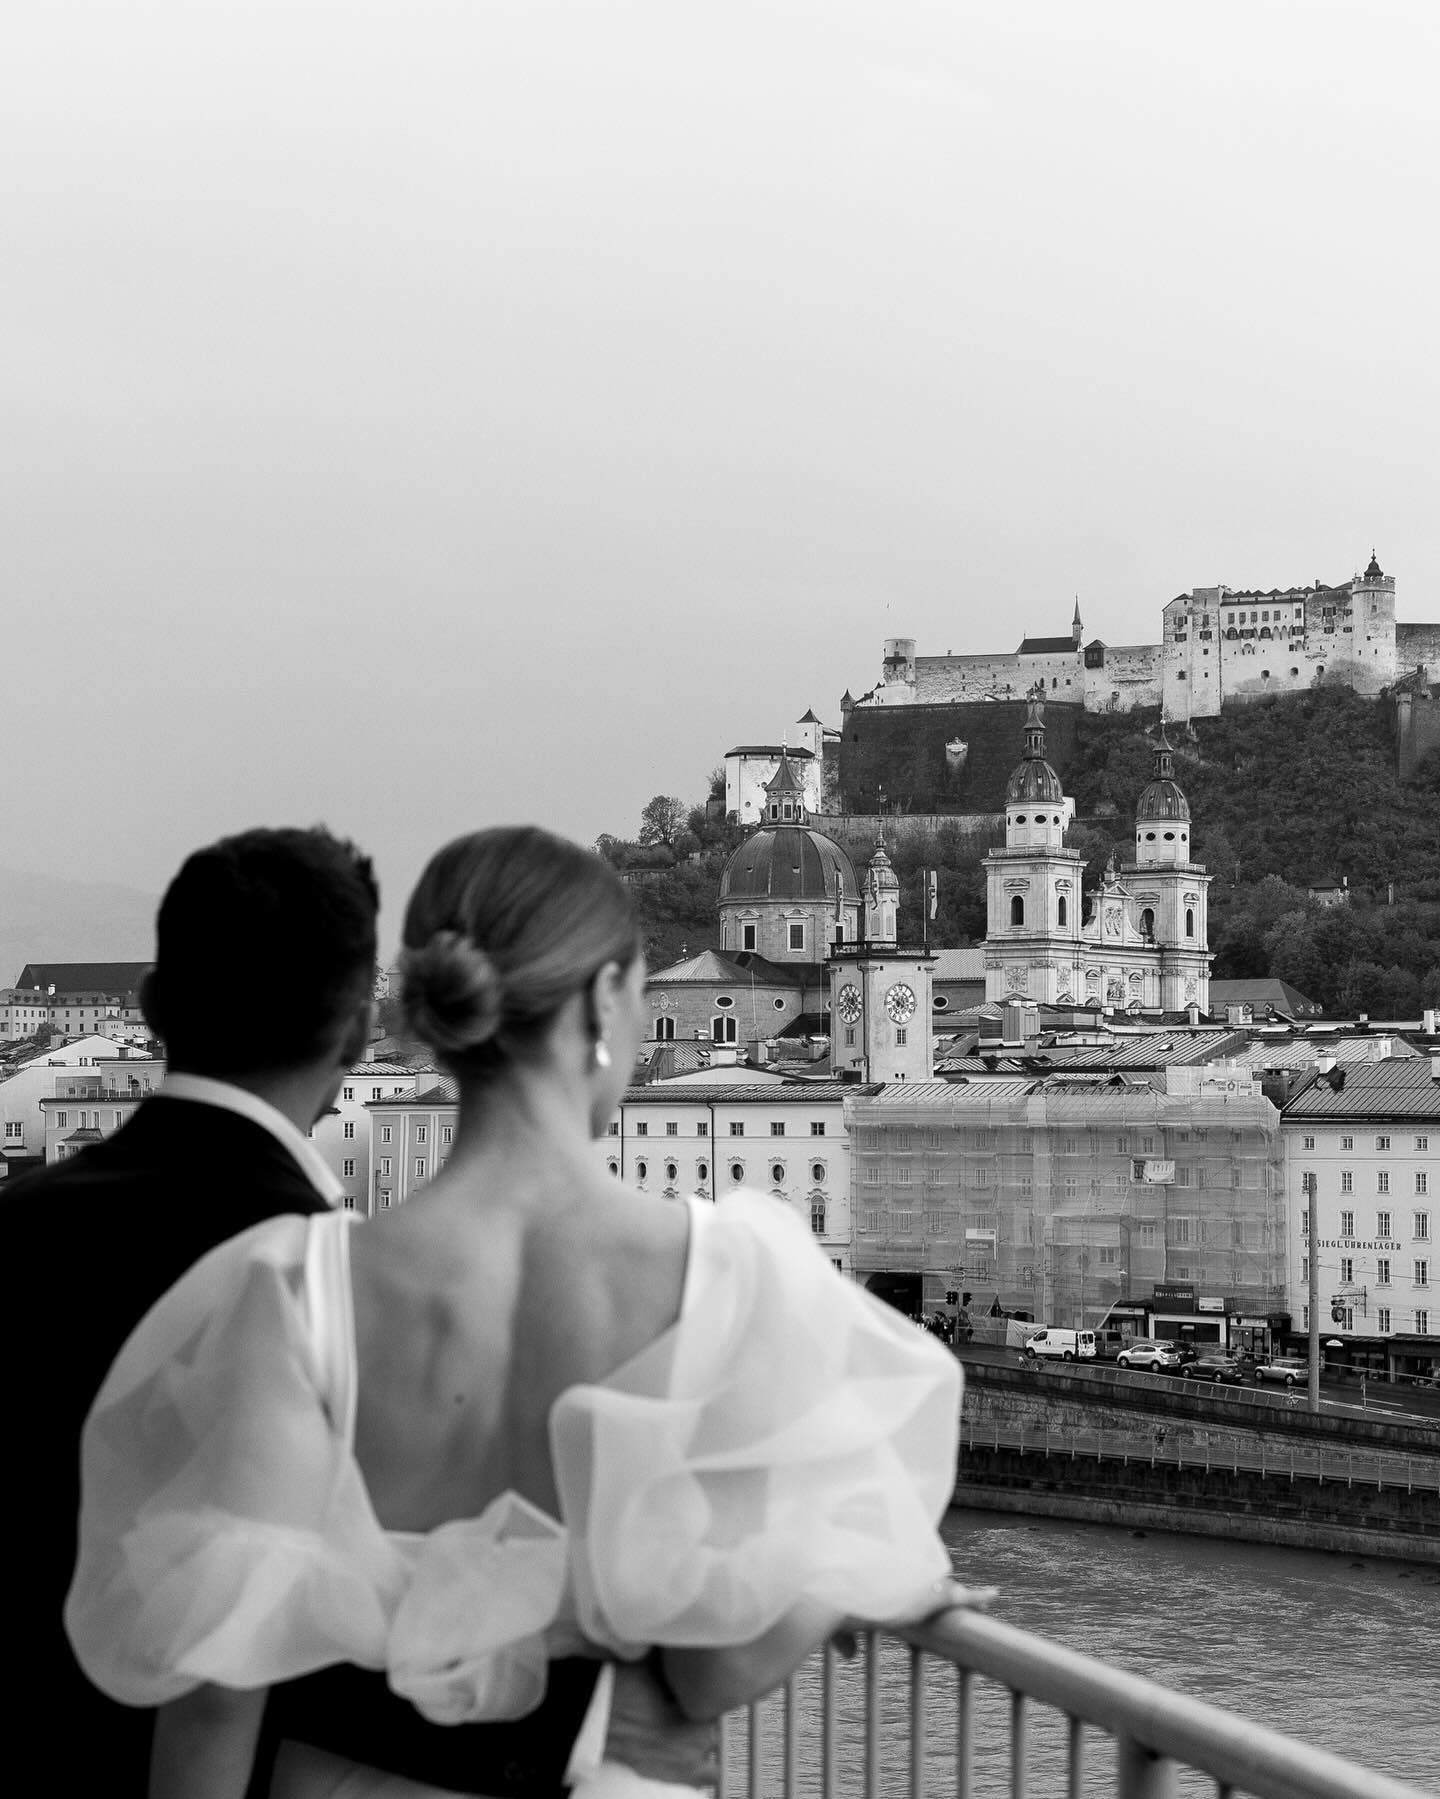 We recently realised an editorial photo shoot at the historic Hotel Sacher in the beautiful city of Salzburg.  We spent a wonderful, creative afternoon with a great team and I am very happy to show you the first results of this day. 

Team:
Planning 